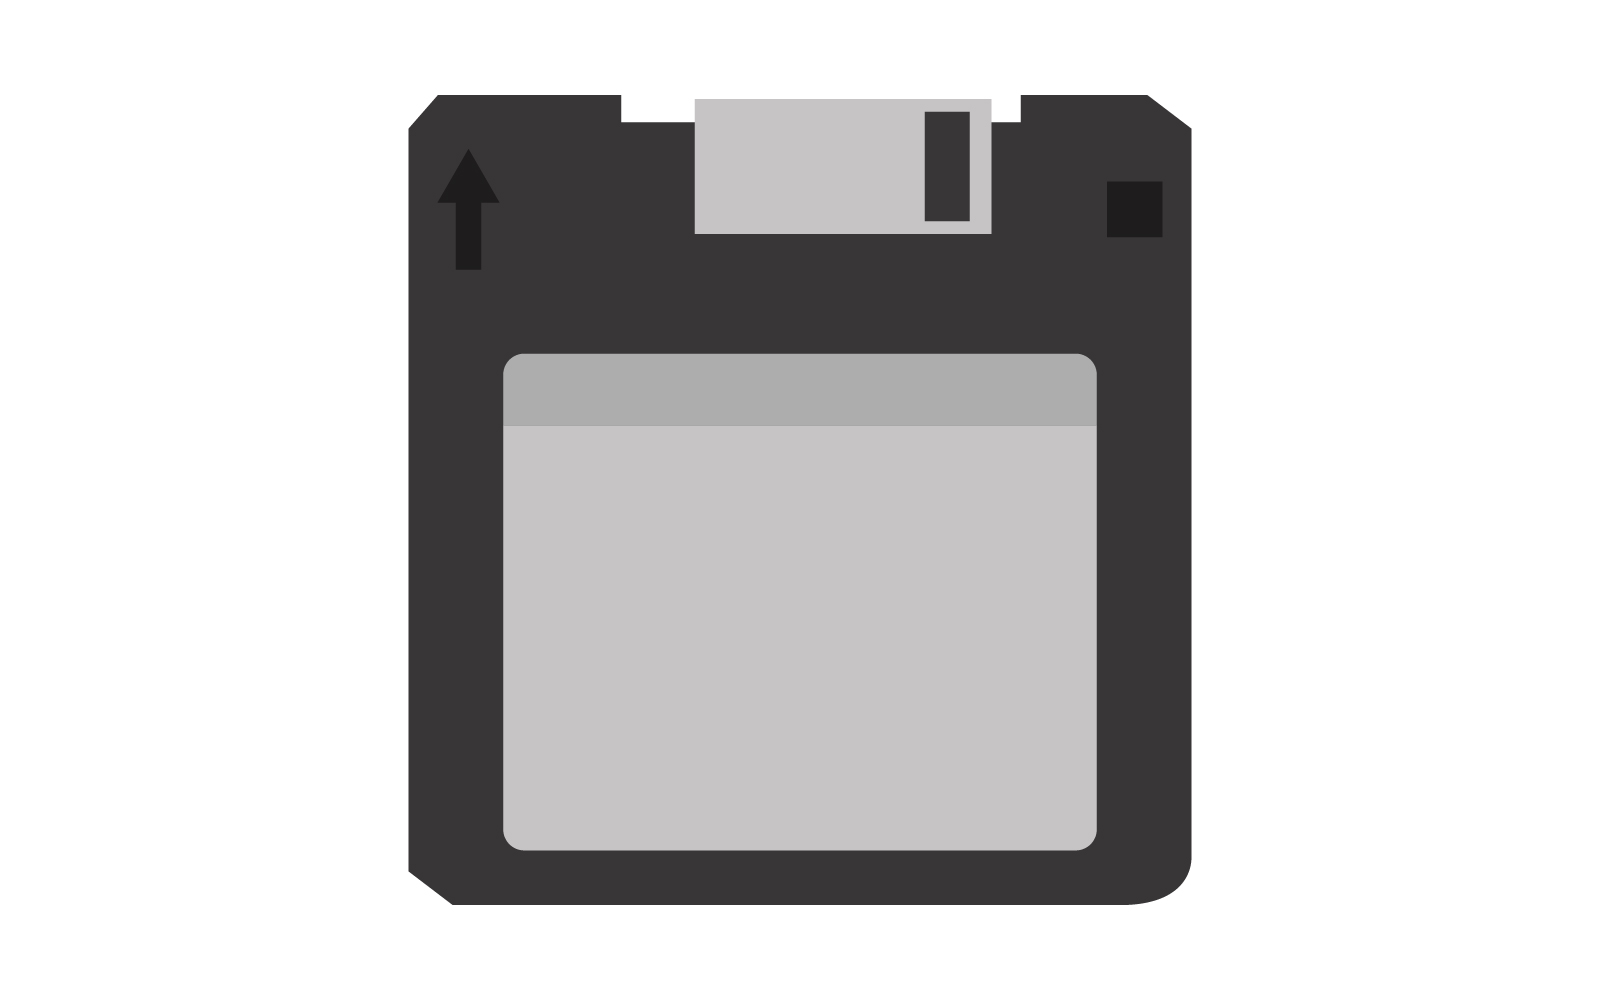 Floppy illustrated on a white background in vector